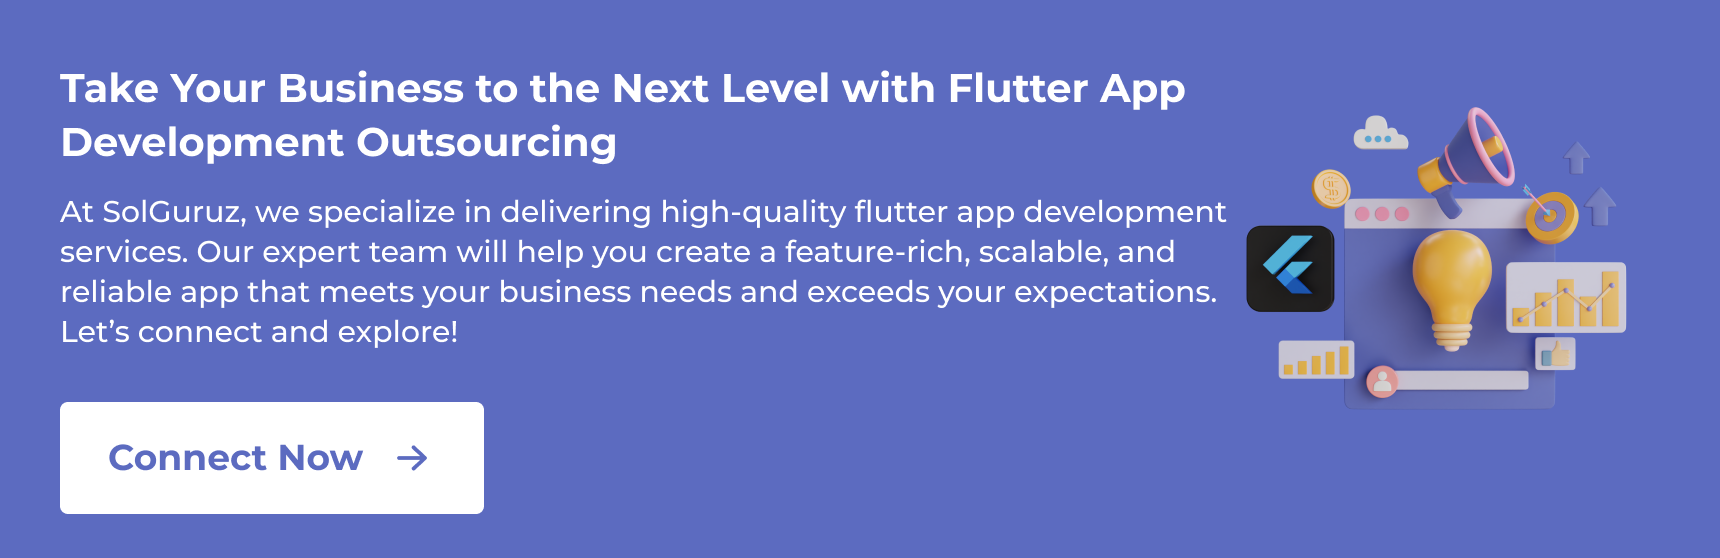 Take Your Business to the Next Level with Flutter App Development Services